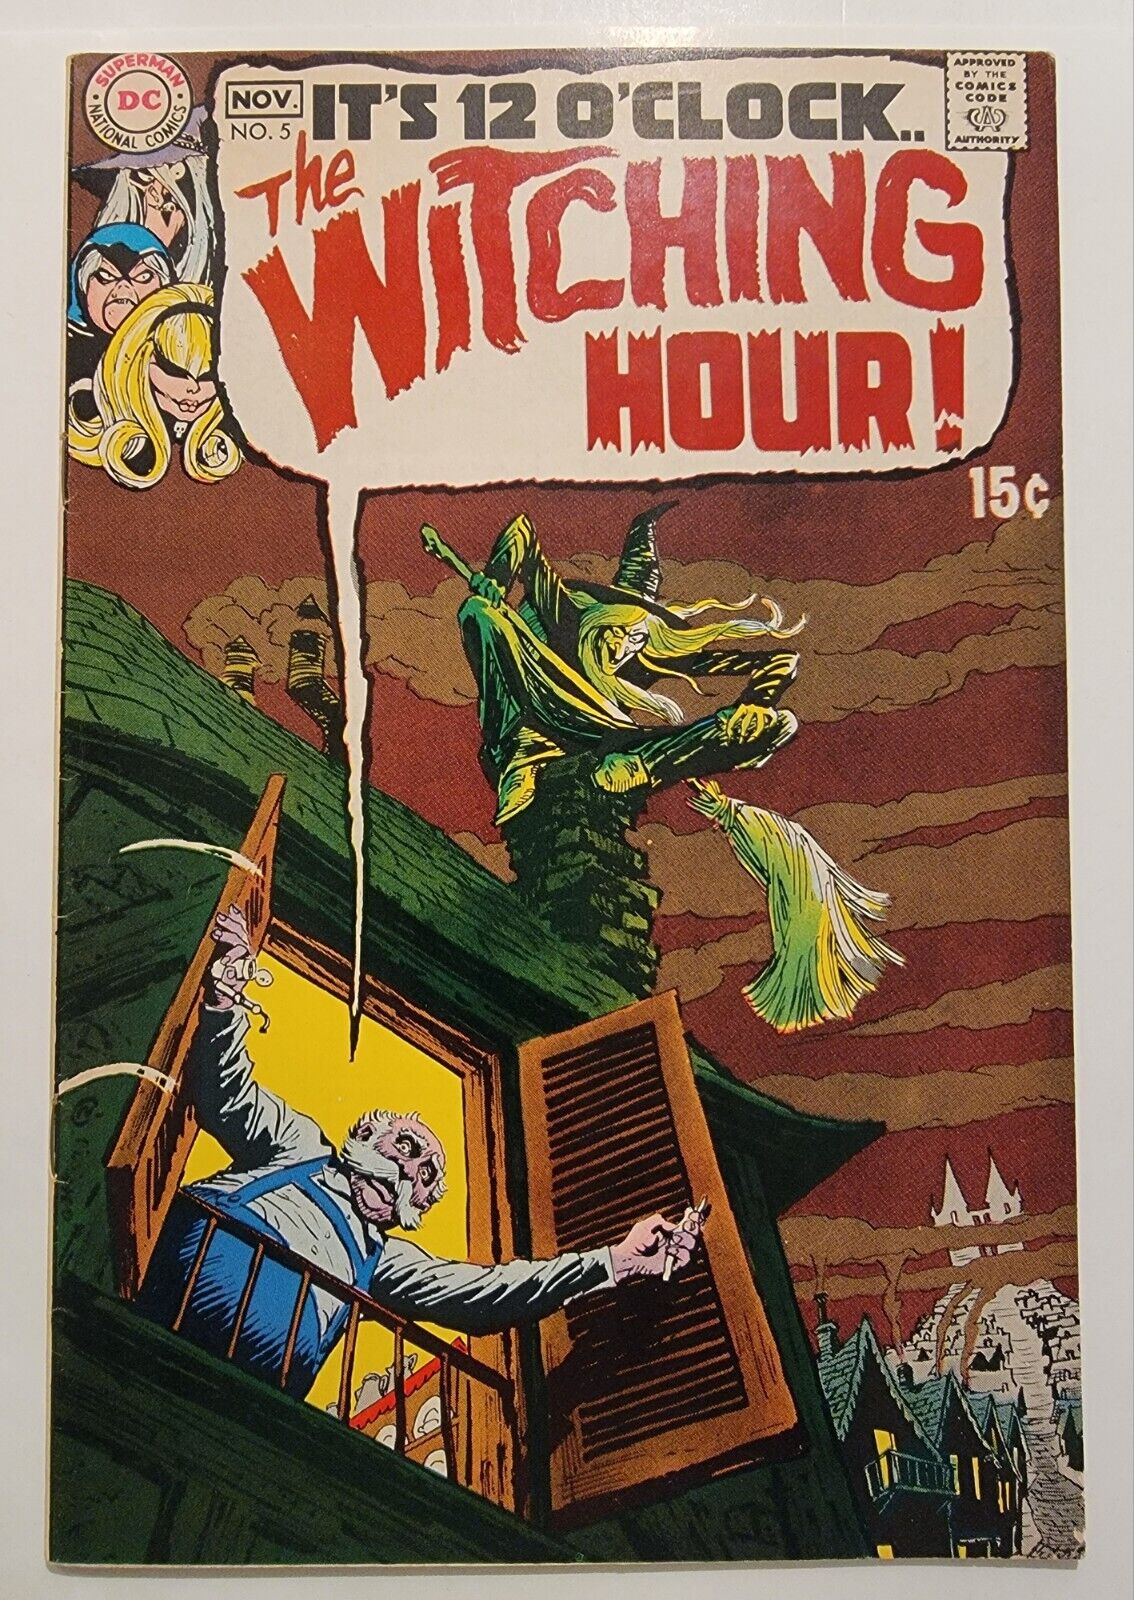 The Witching Hour #5 VF+ Silver Age Horror DC 1969 Bernie Wrightson, High Grade 